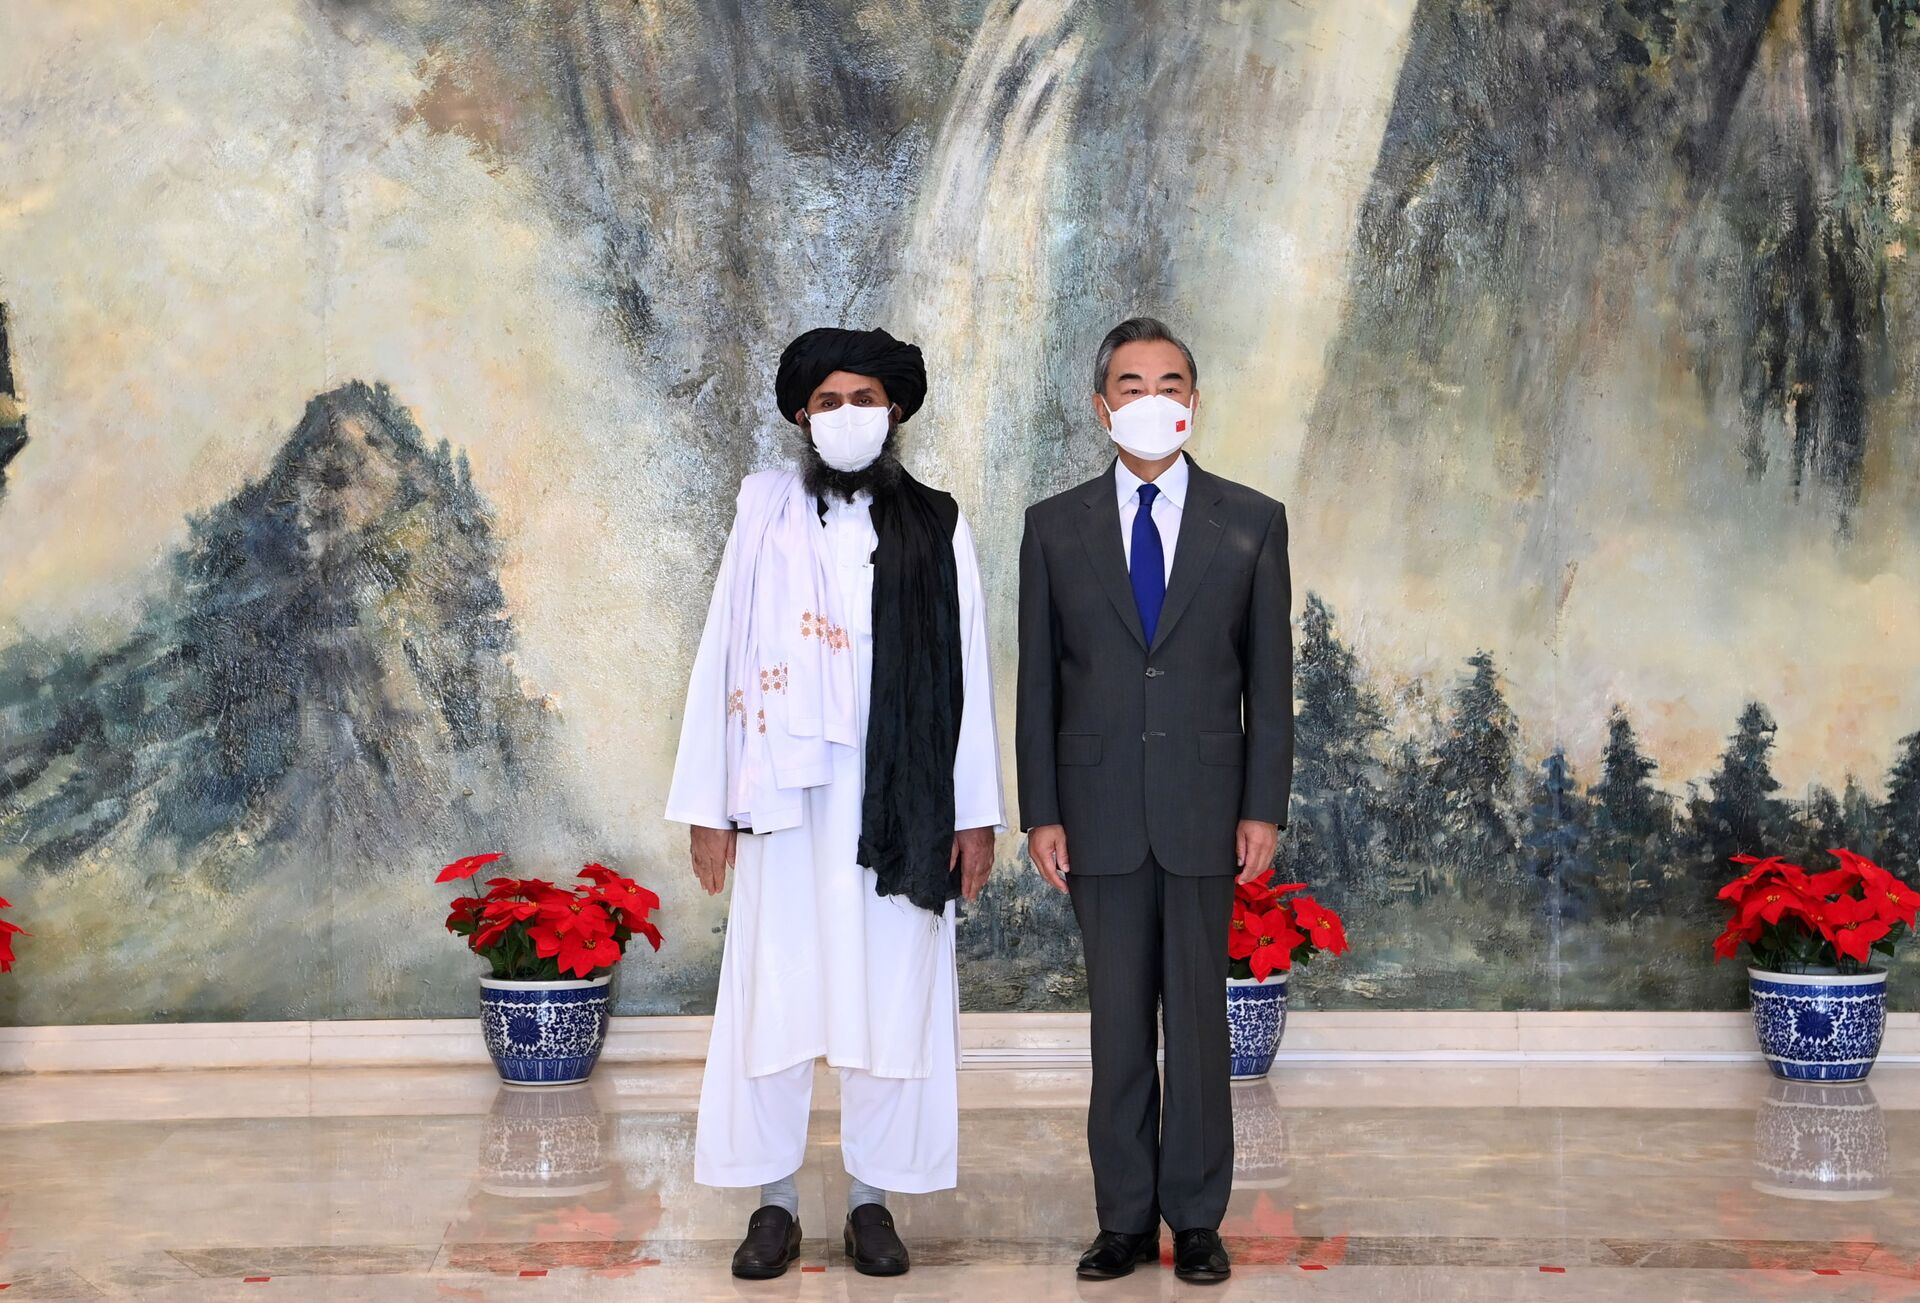 Chinese State Councilor and Foreign Minister Wang Yi meets with Mullah Abdul Ghani Baradar, political chief of Afghanistan's Taliban, in Tianjin, China July 28, 2021. Picture taken July 28, 2021. - Sputnik International, 1920, 13.09.2021